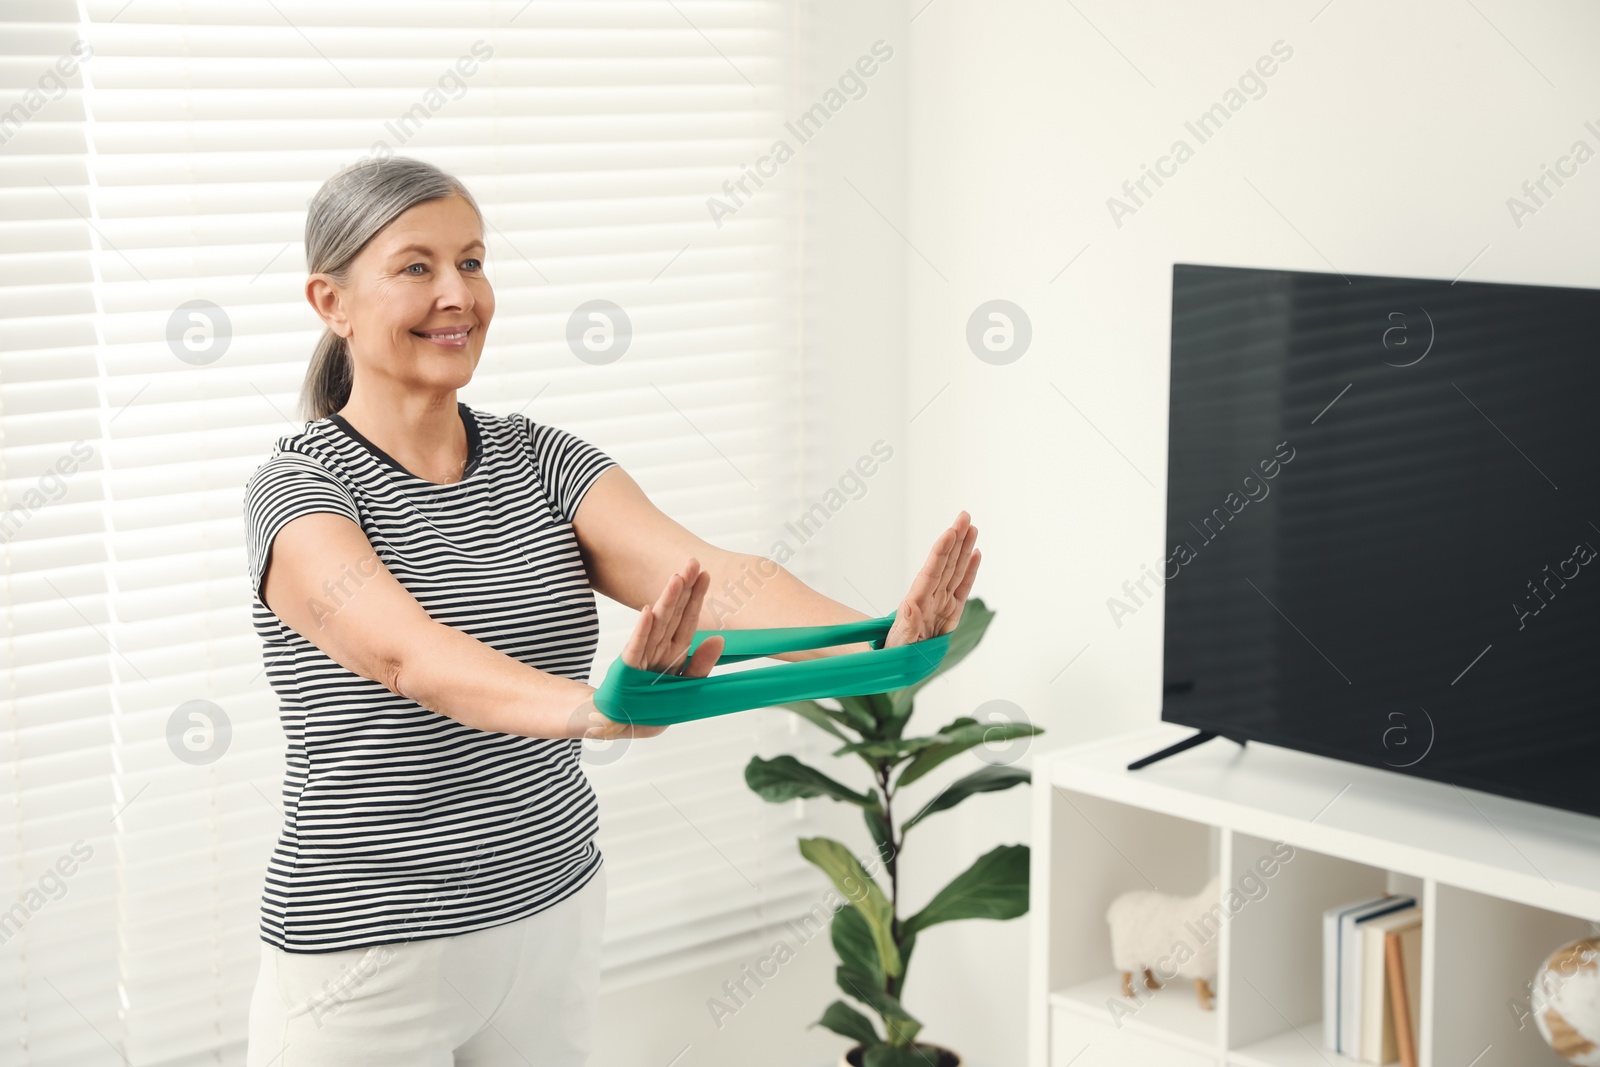 Photo of Senior woman doing exercise with fitness elastic band at home. Space for text